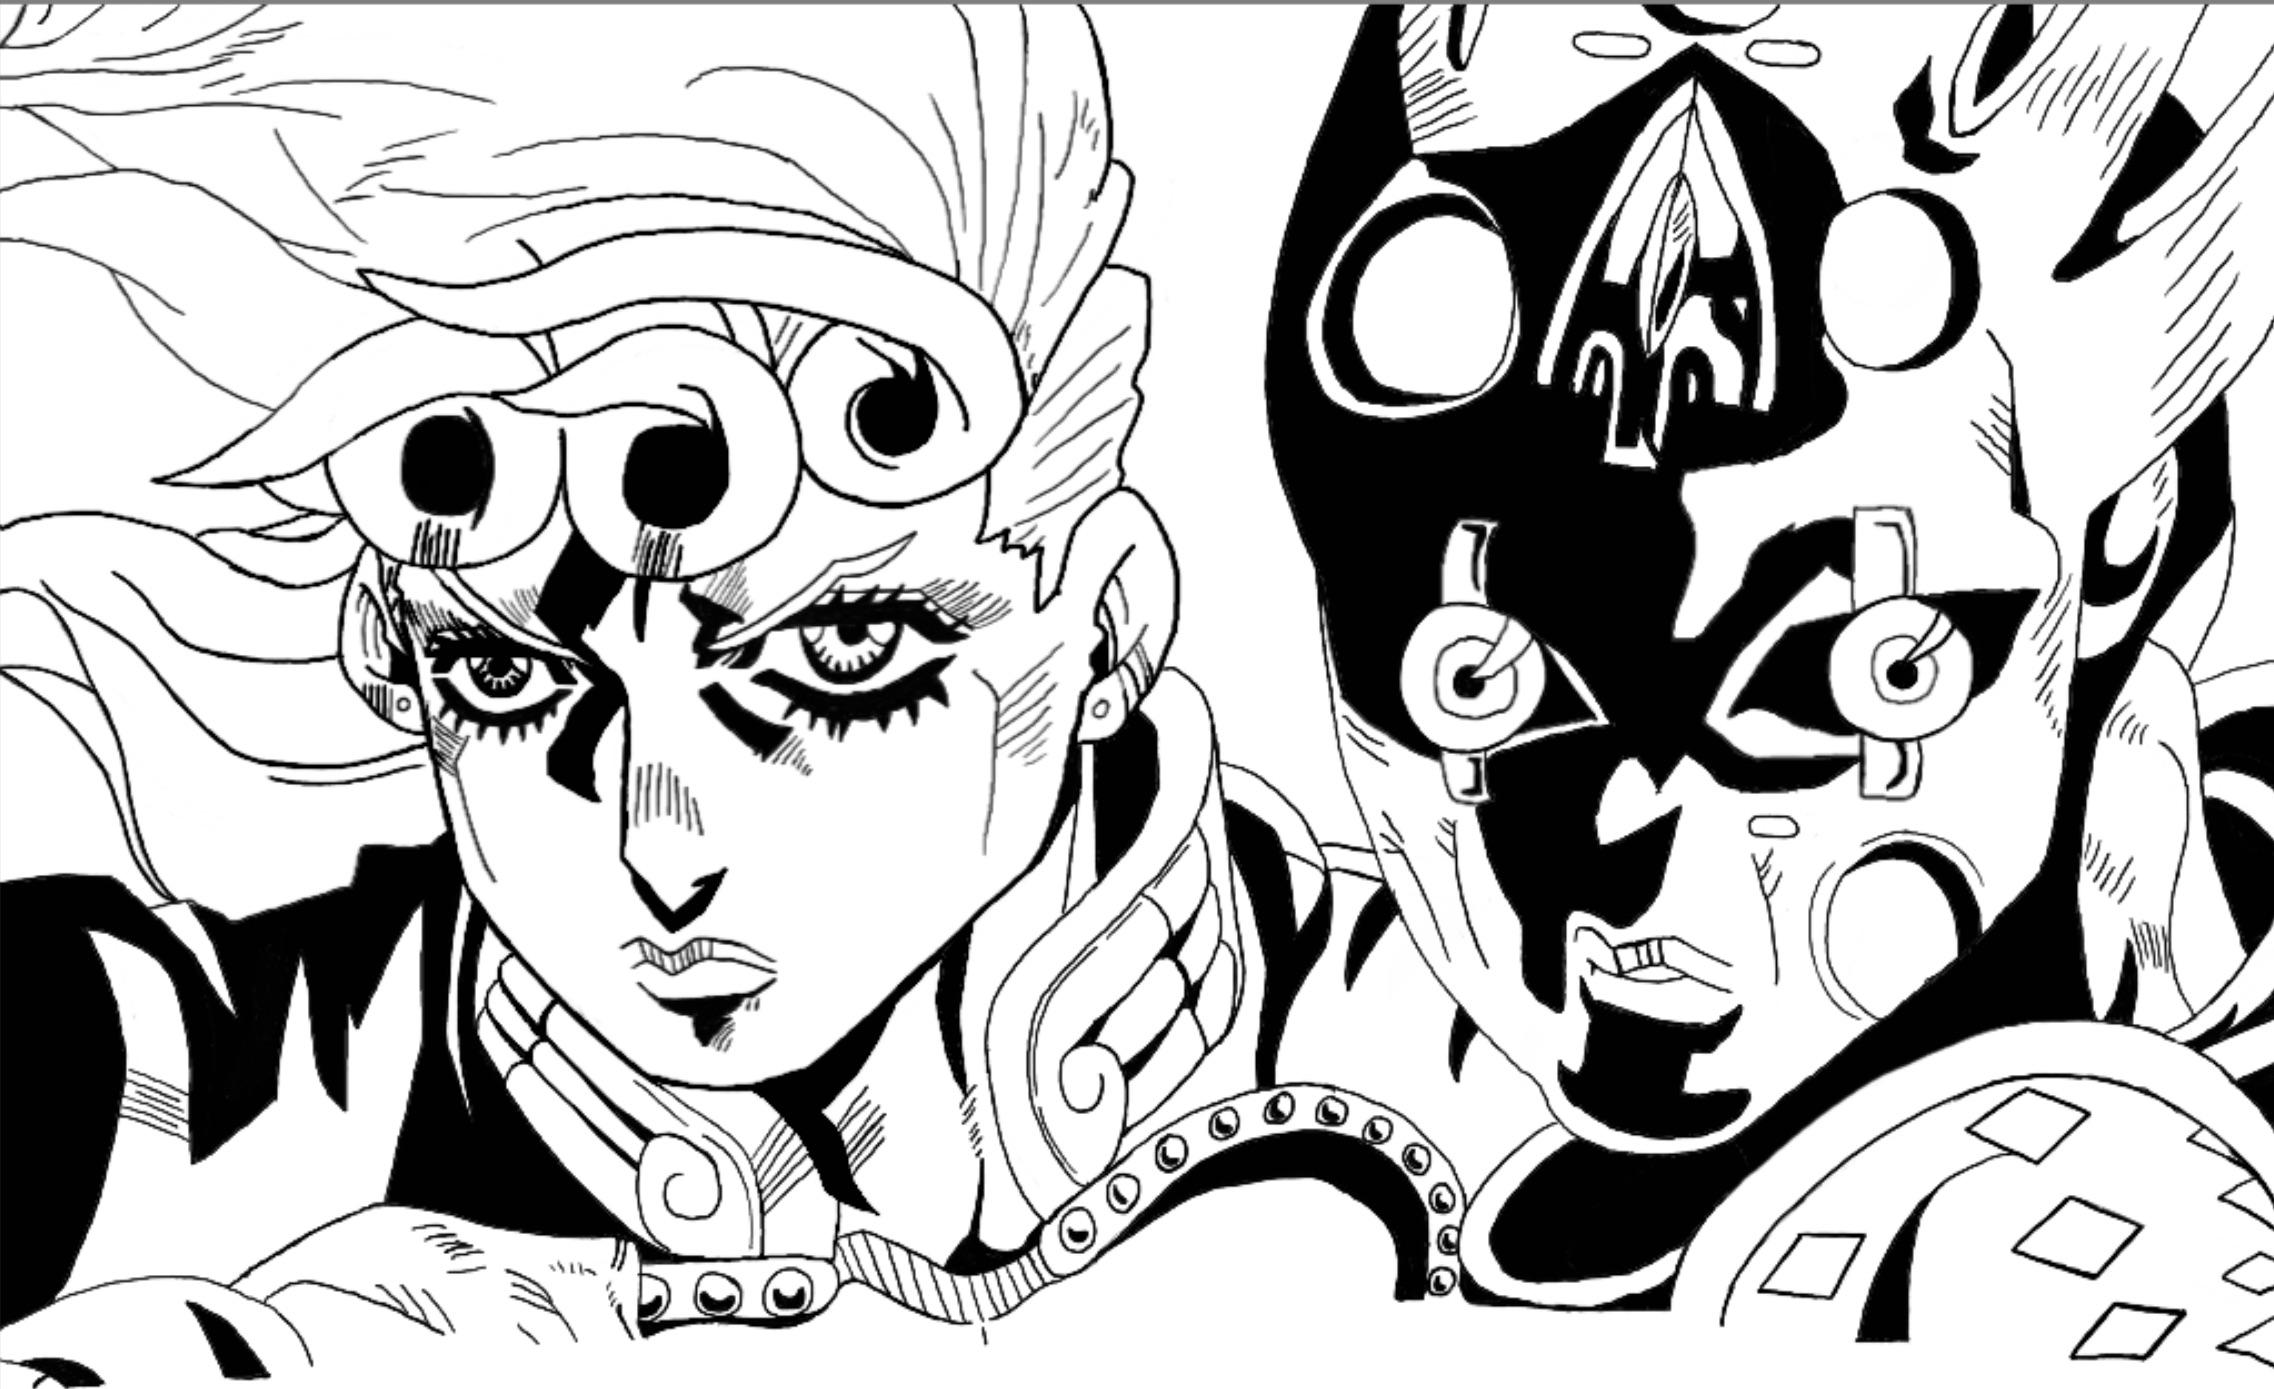 Giorno and GER fan art | Scrolller